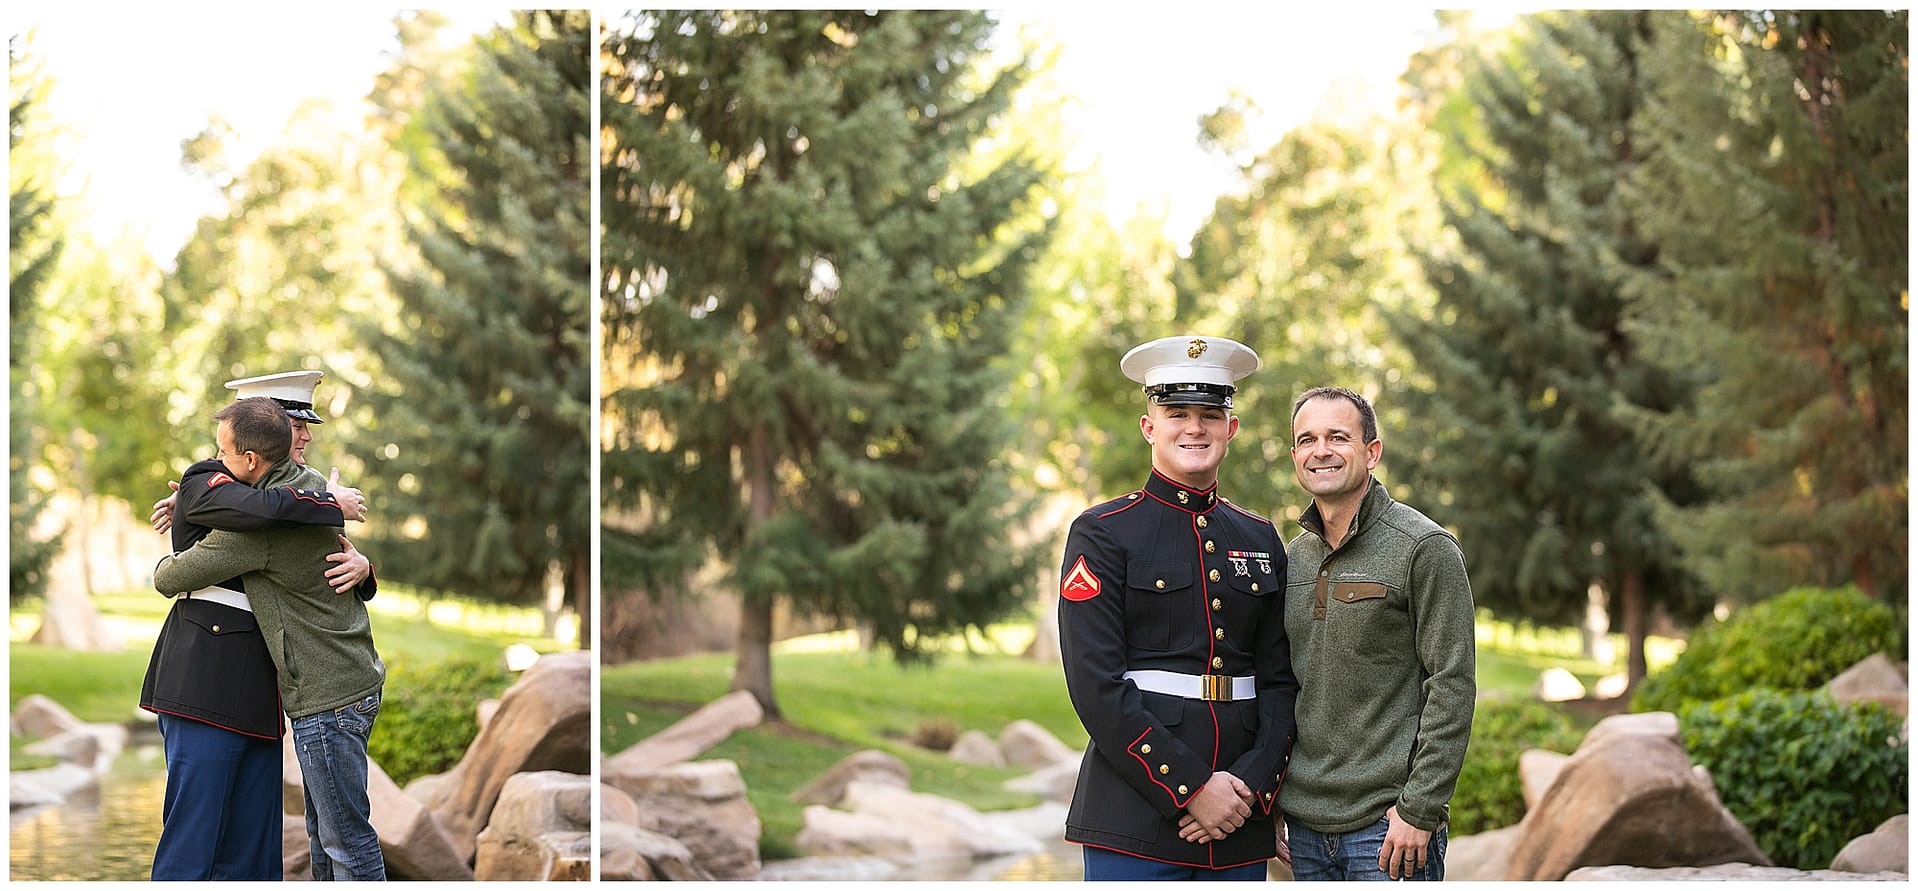 Young man embraces father prior to deployment. Photos by Tiffany Hix Photography.